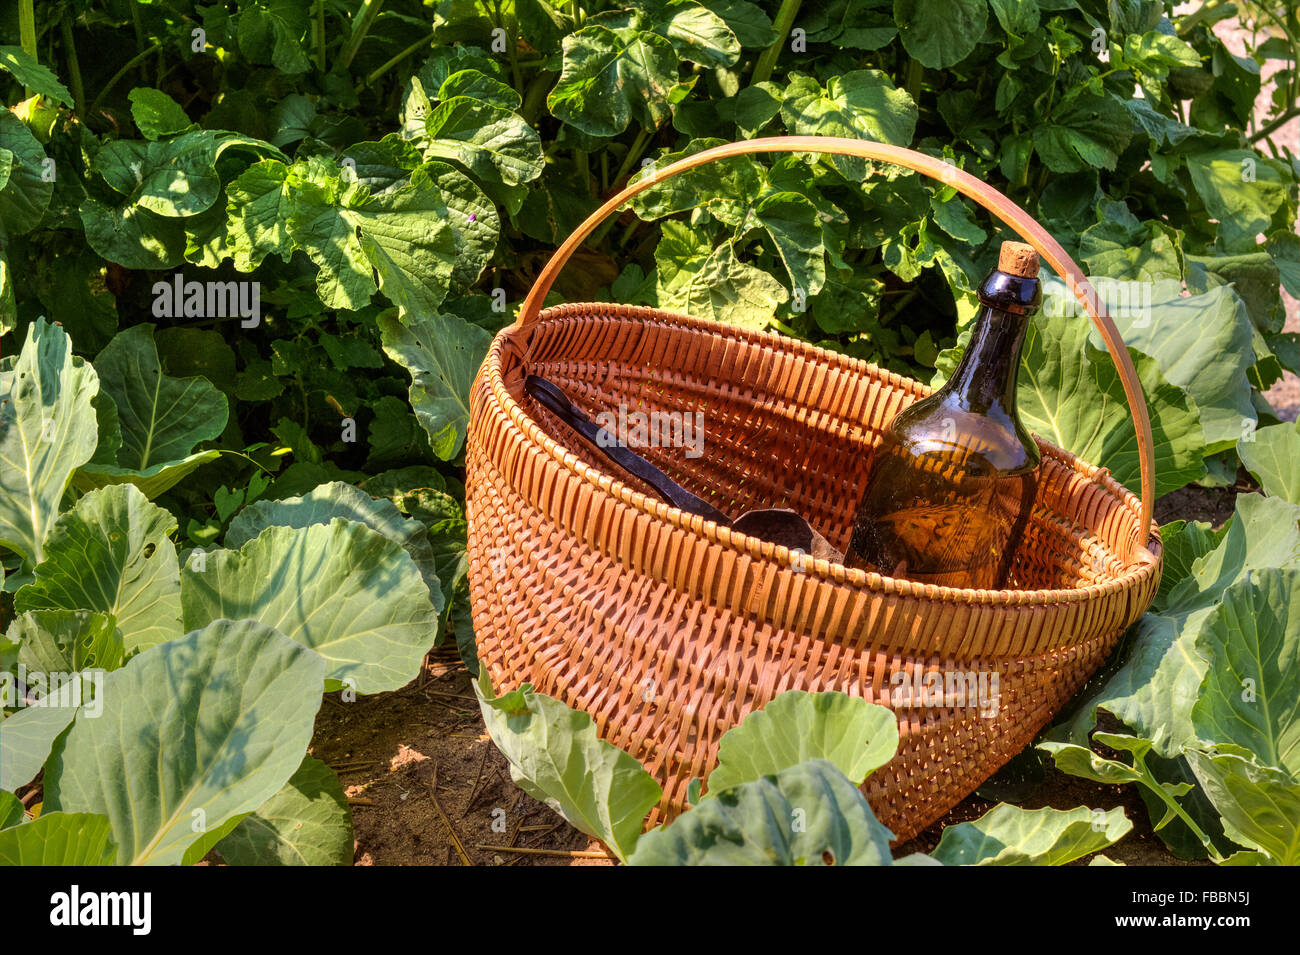 Homeopathic Medicine. Bottle of herbal tonic in  the garden surrounded by organic, vegetables. Stock Photo